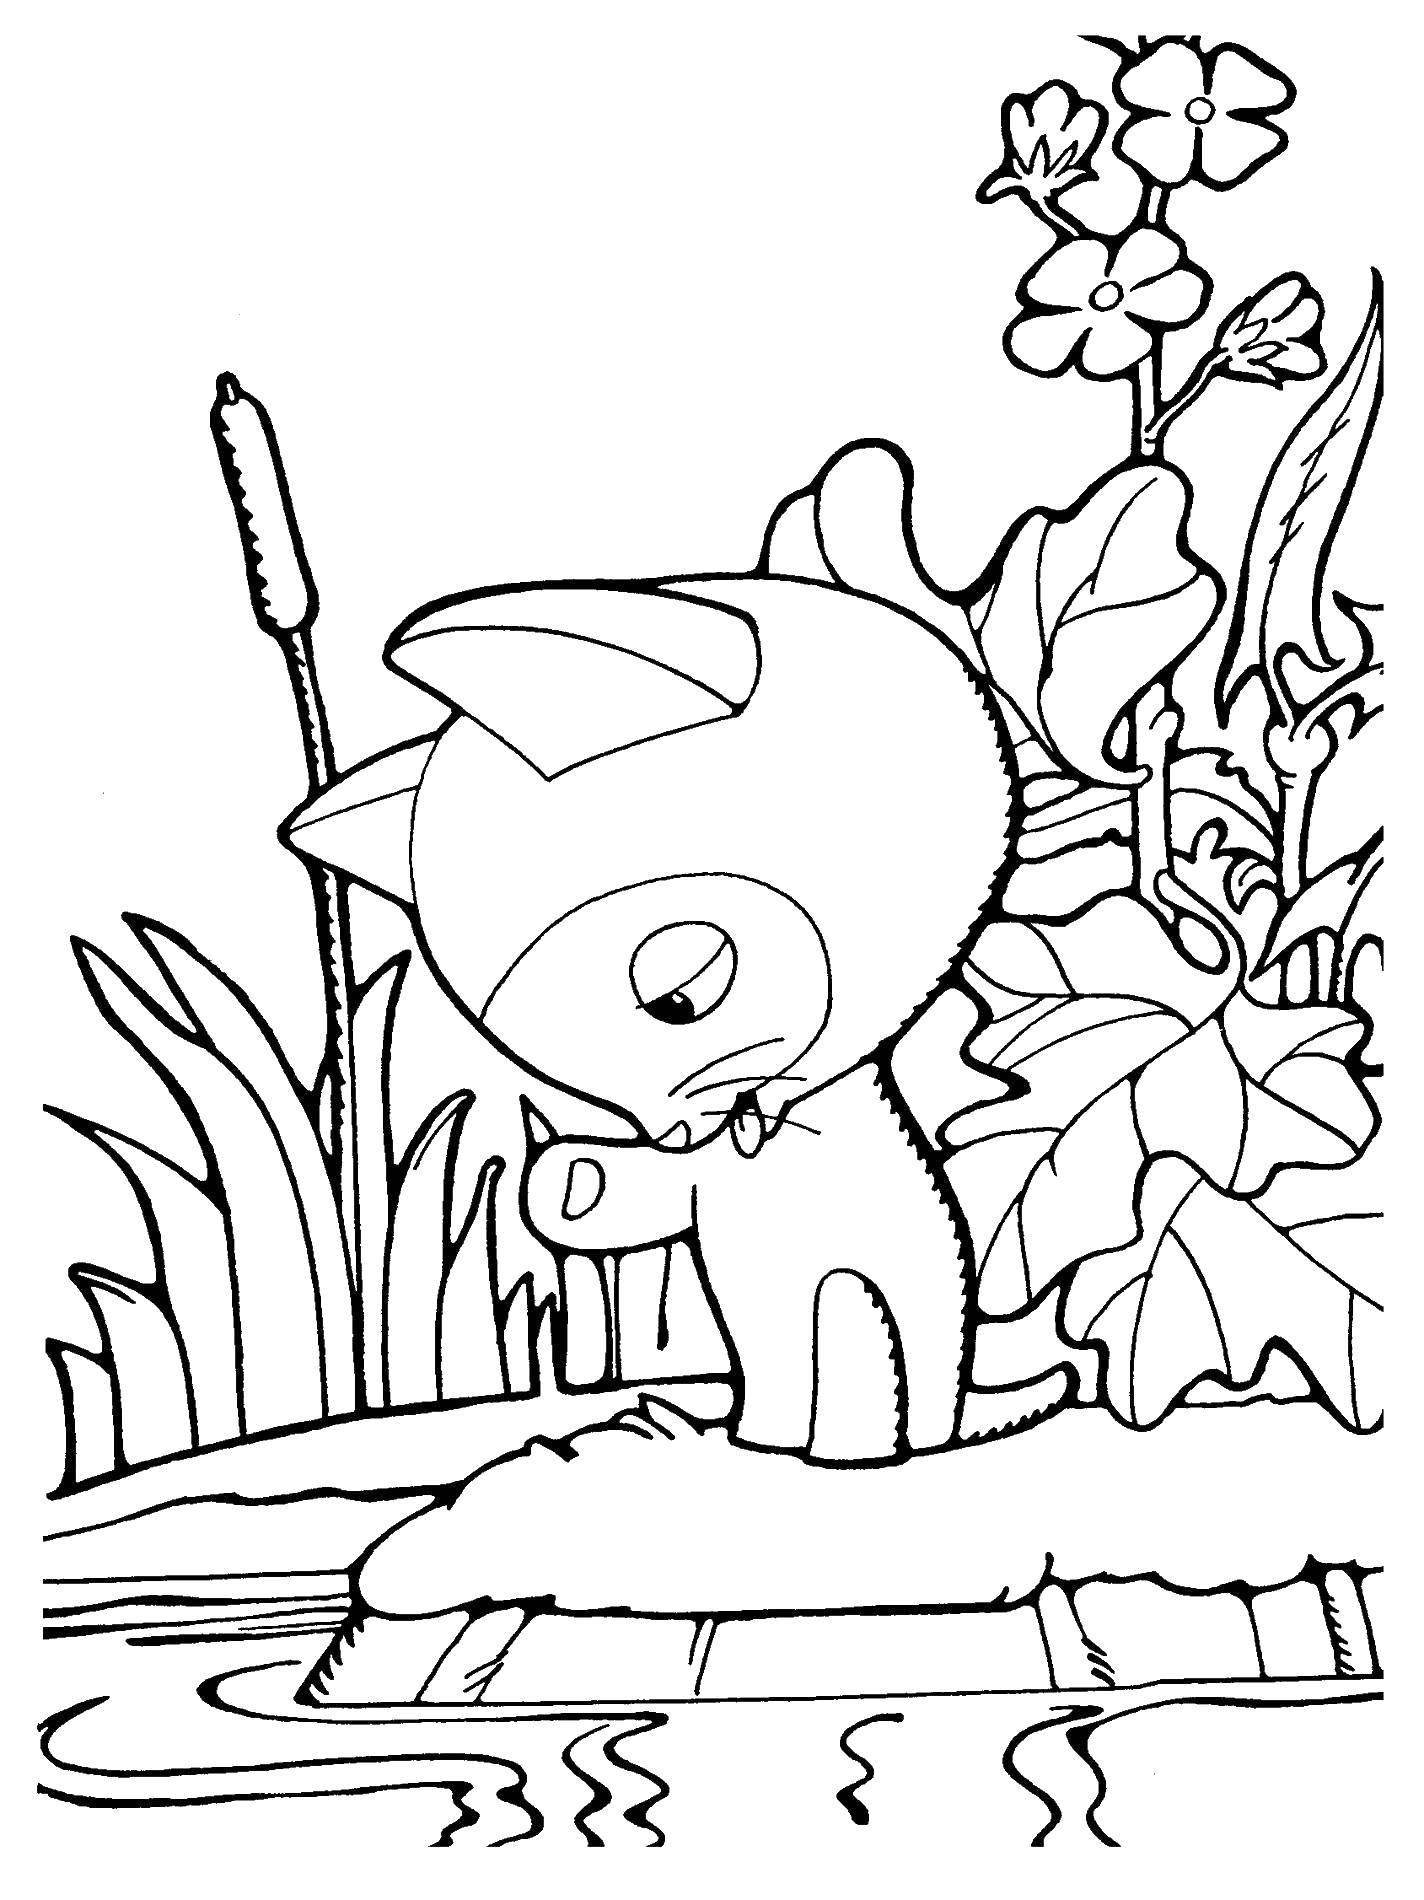 Coloring Kitten named woof. Category cartoons. Tags:  kitty.